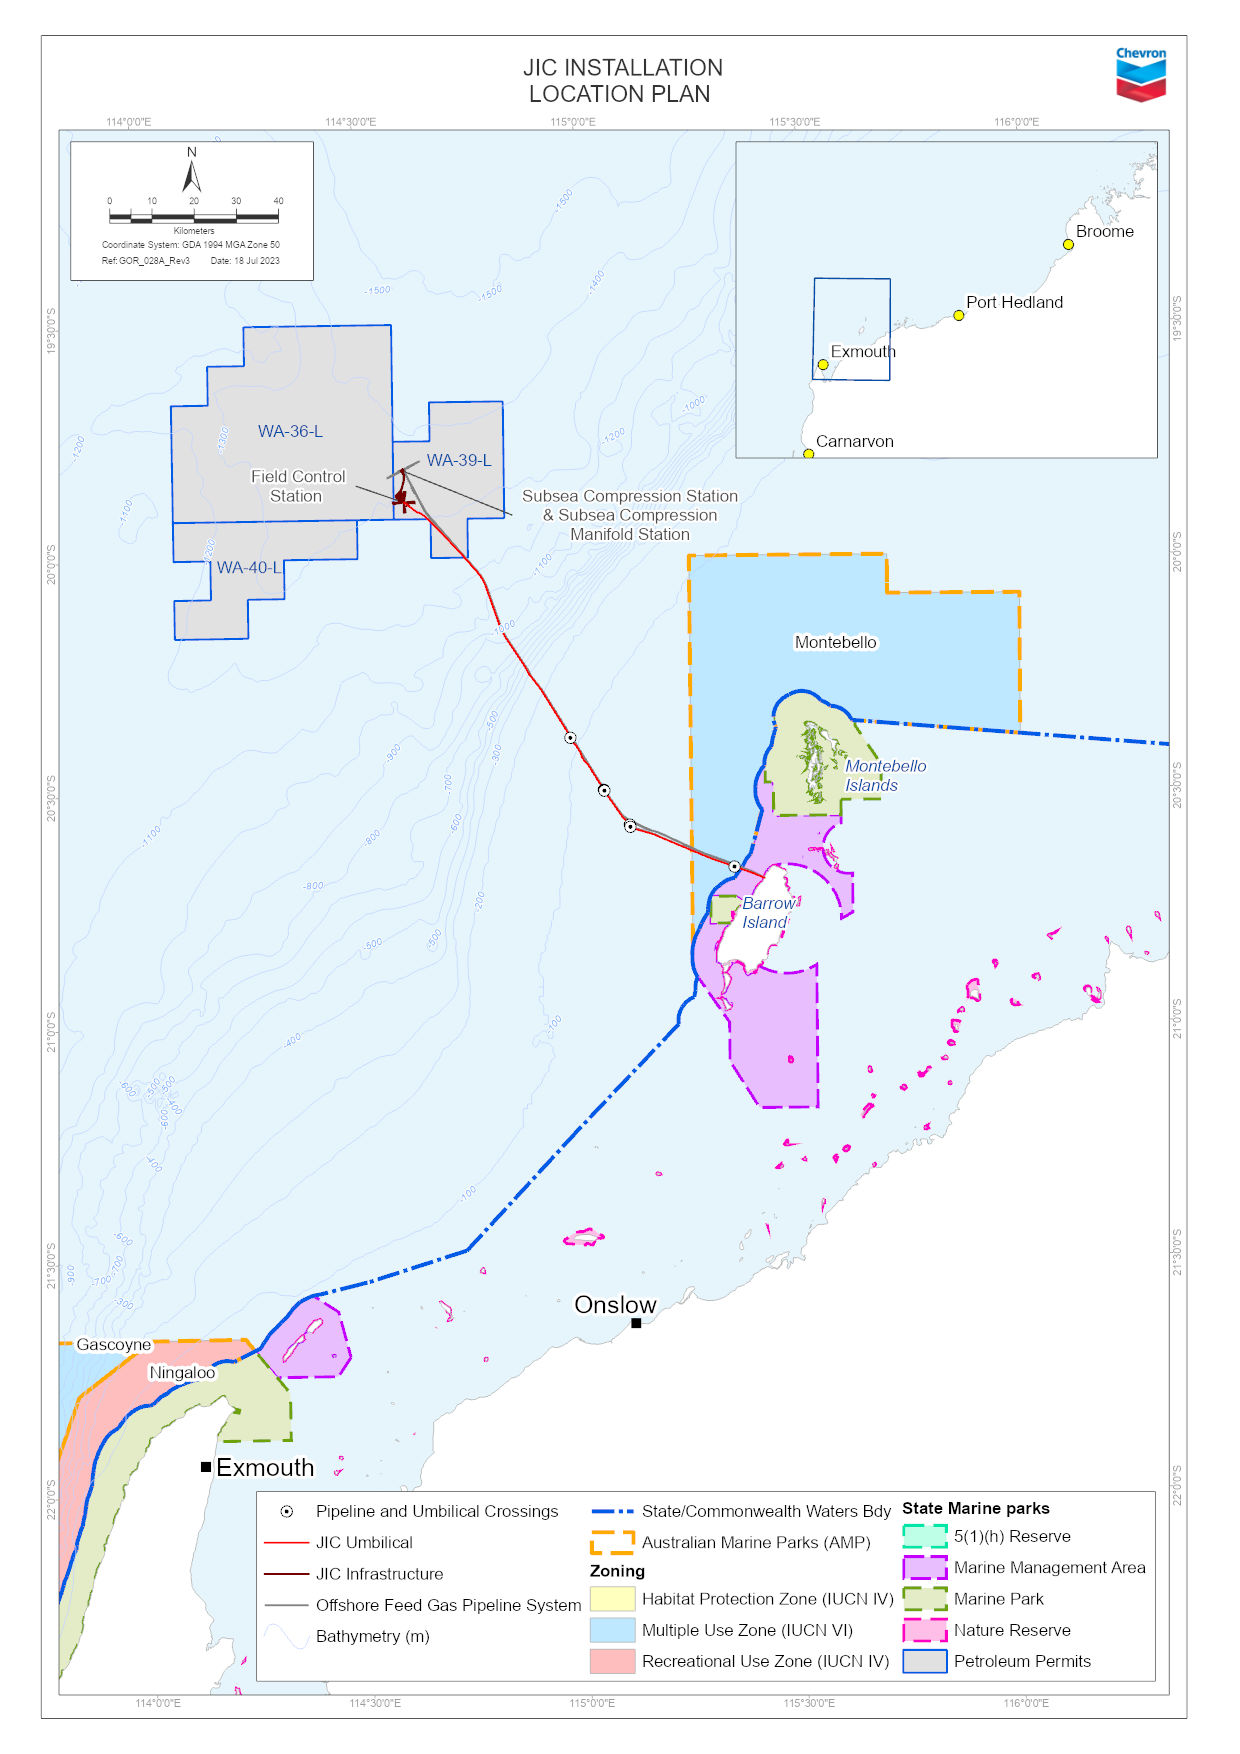 Location map - Activity: Gorgon Gas Development Pipeline and Subsea Infrastructure Installation and Pre-Commissioning (refer to description)